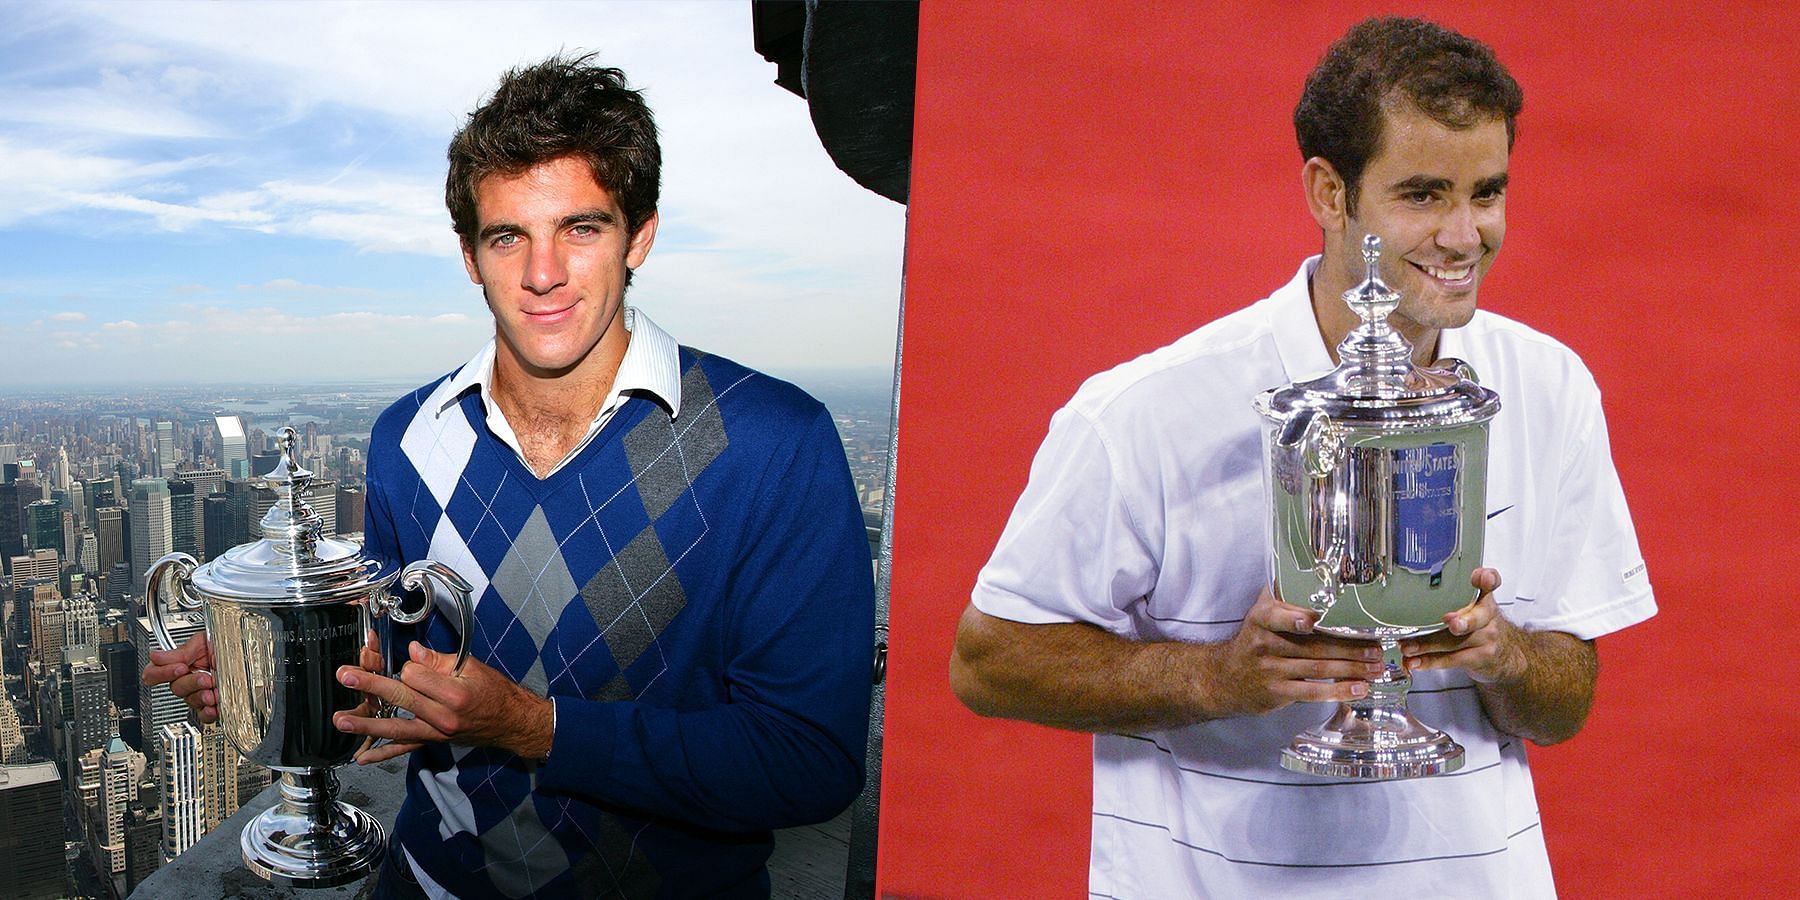 Juan Martin Del Potro (left) and Pete Sampras are two of the youngest US Open winners.